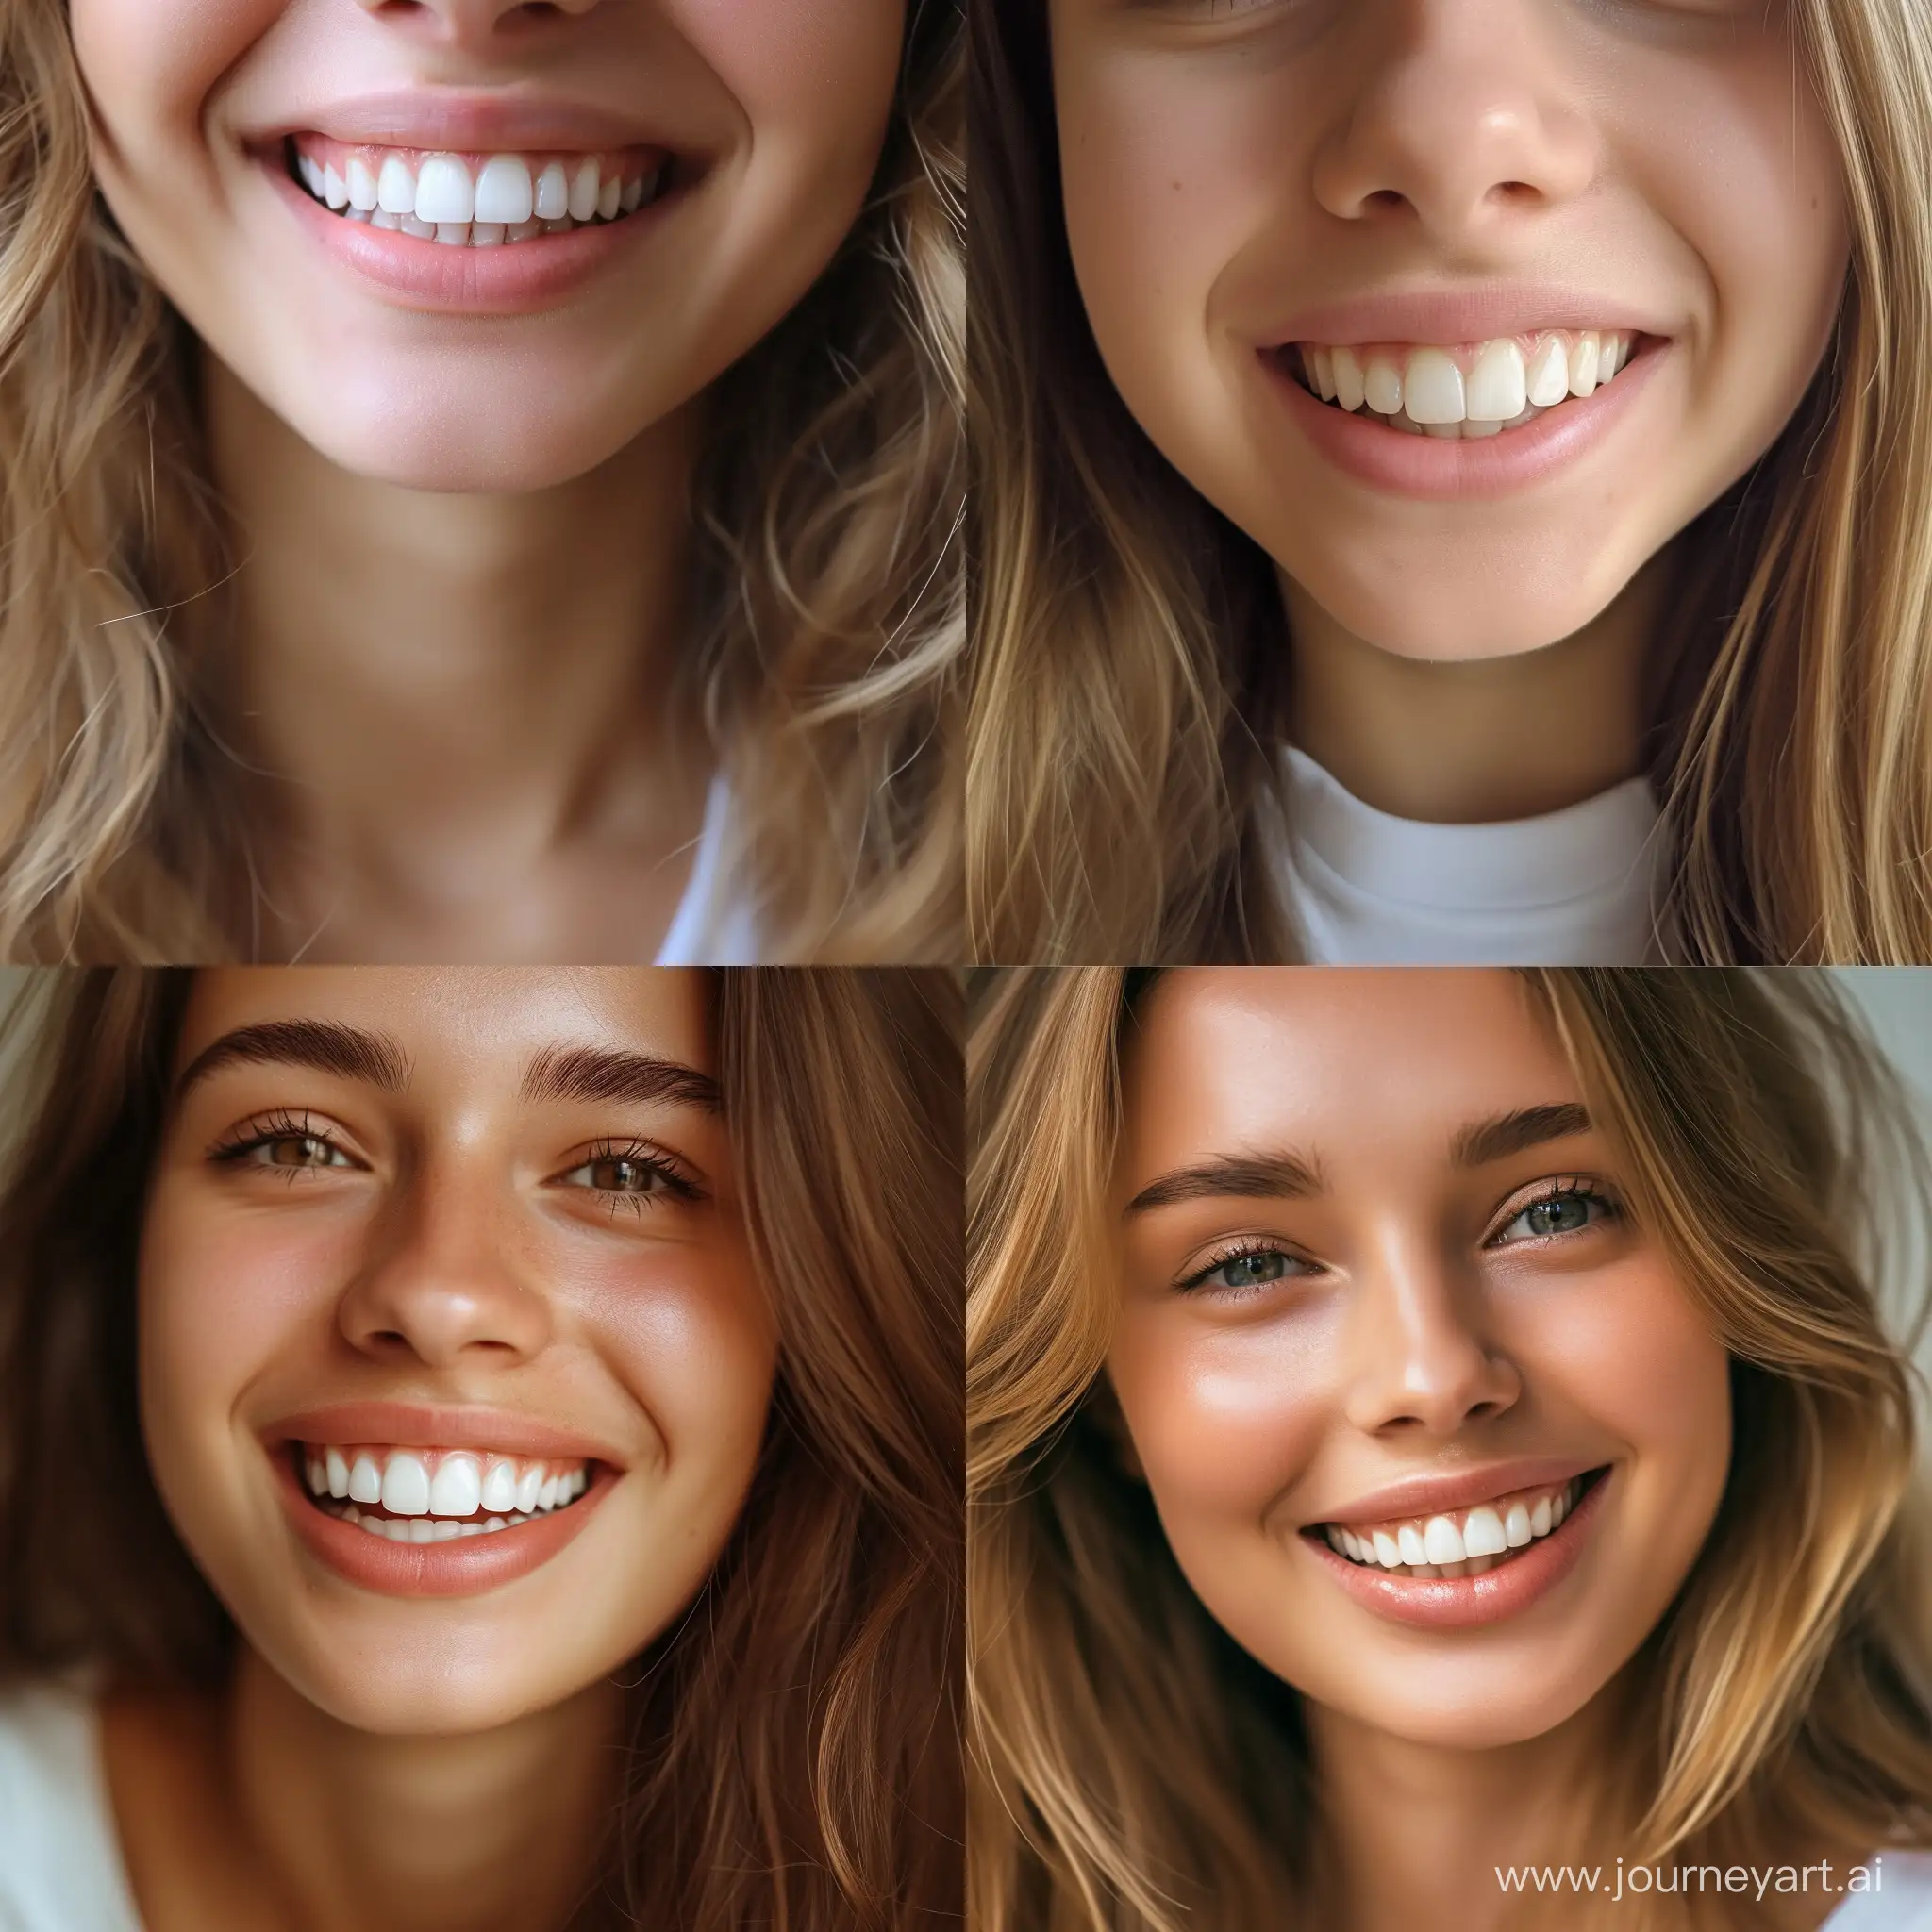 The girl is smiling with clean teeth
